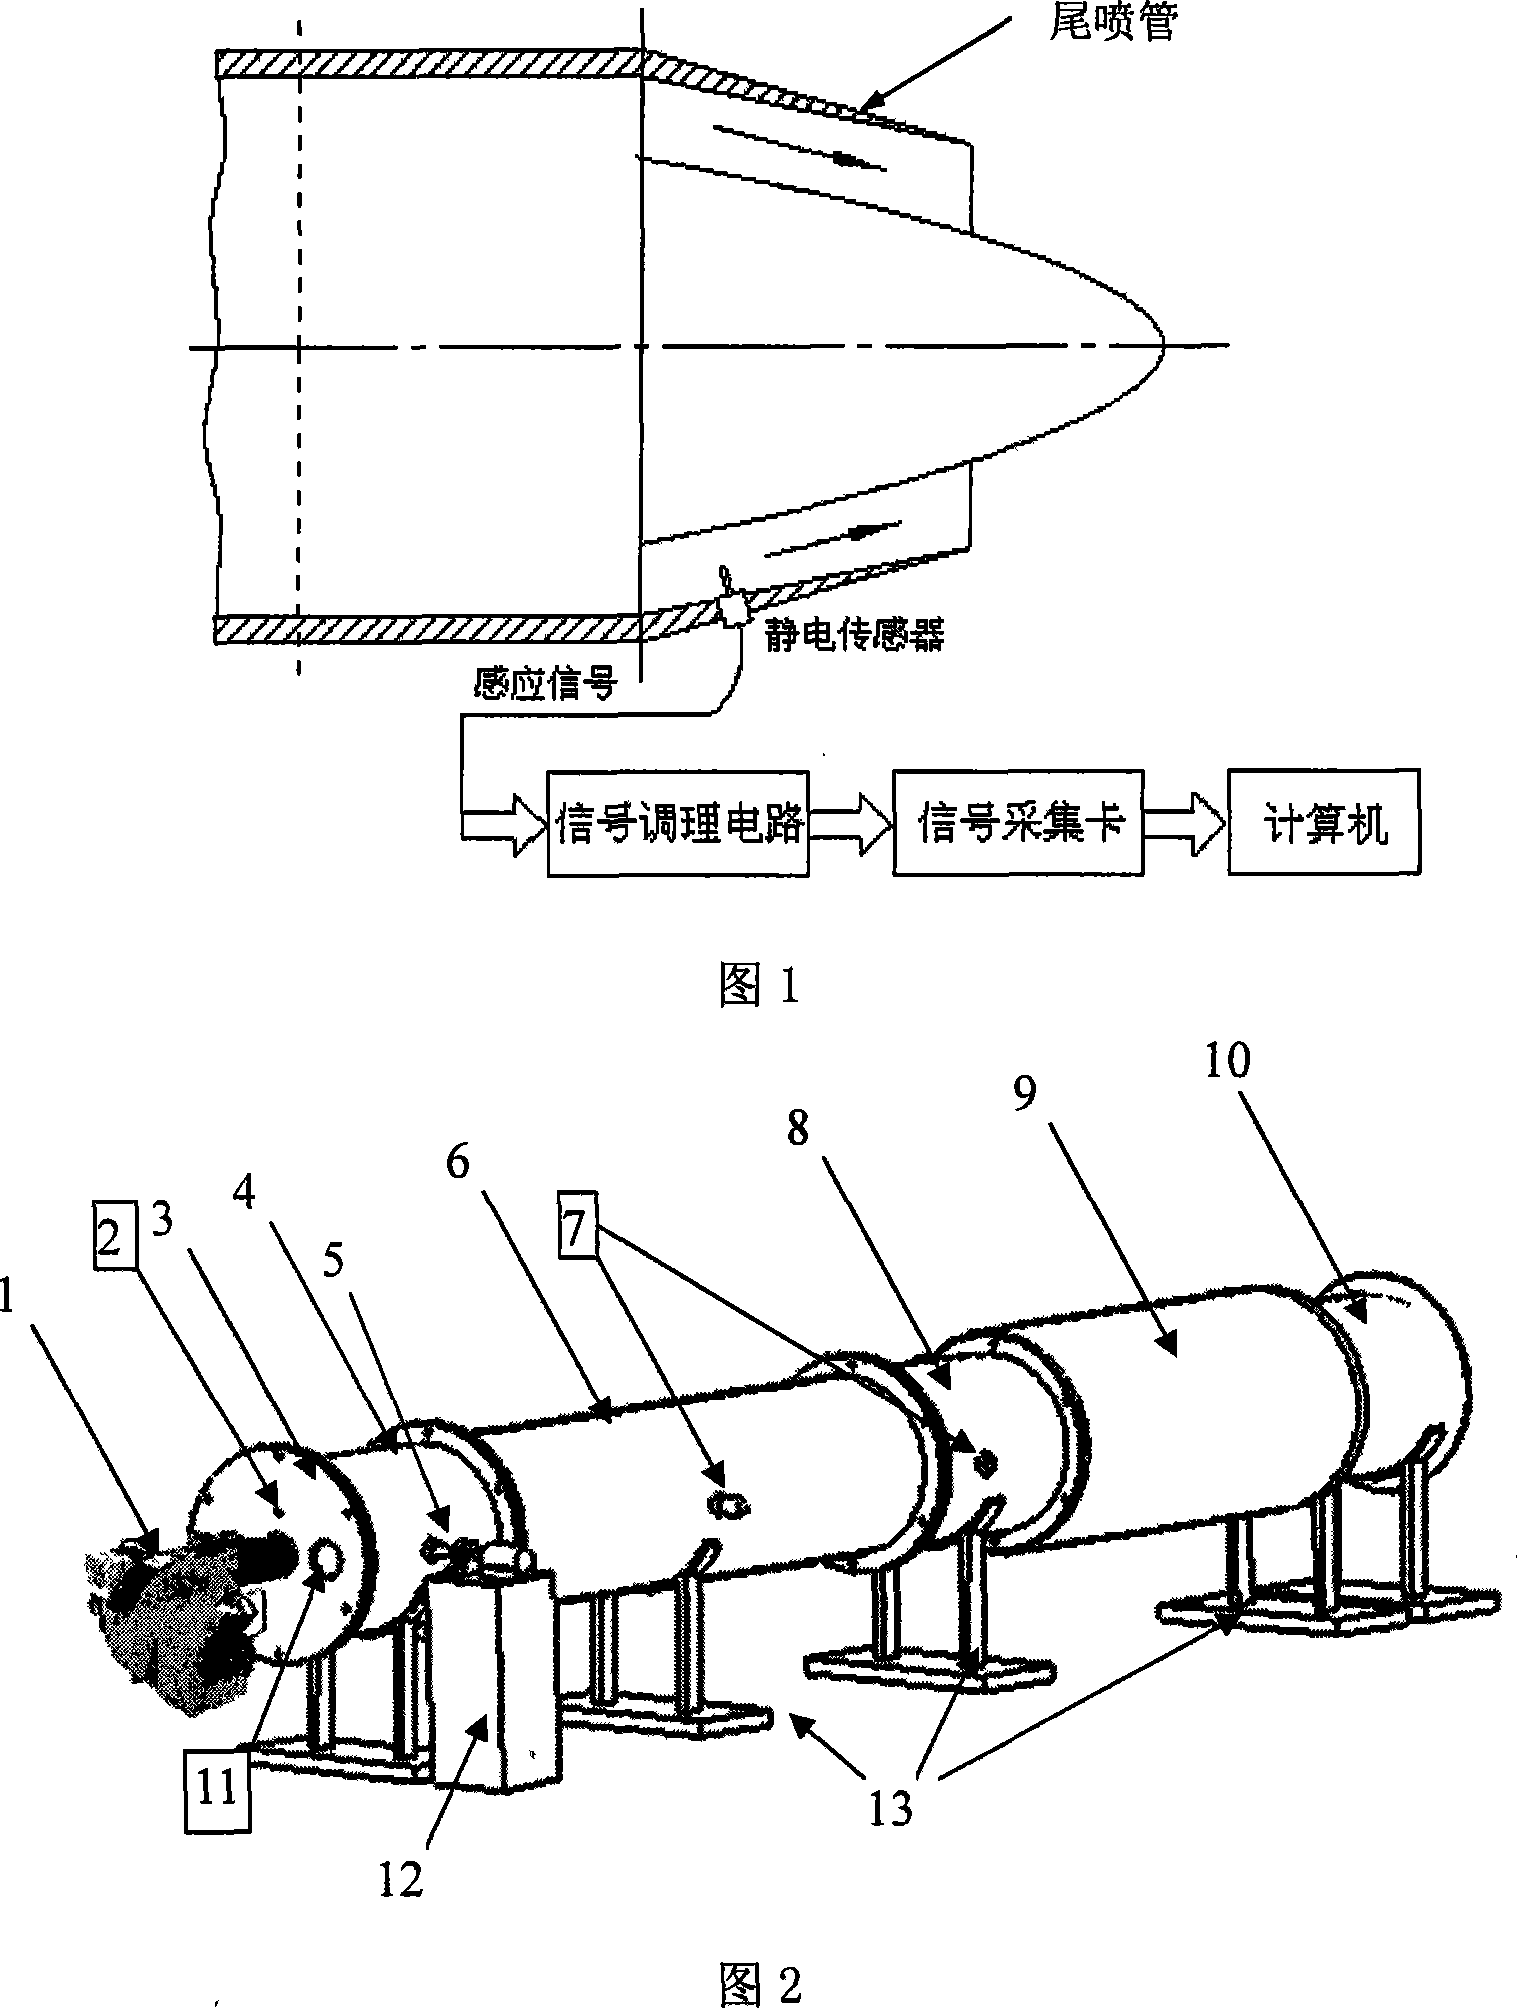 Aerial engine air passage electrostatic monitoring system and analog experiment apparatus